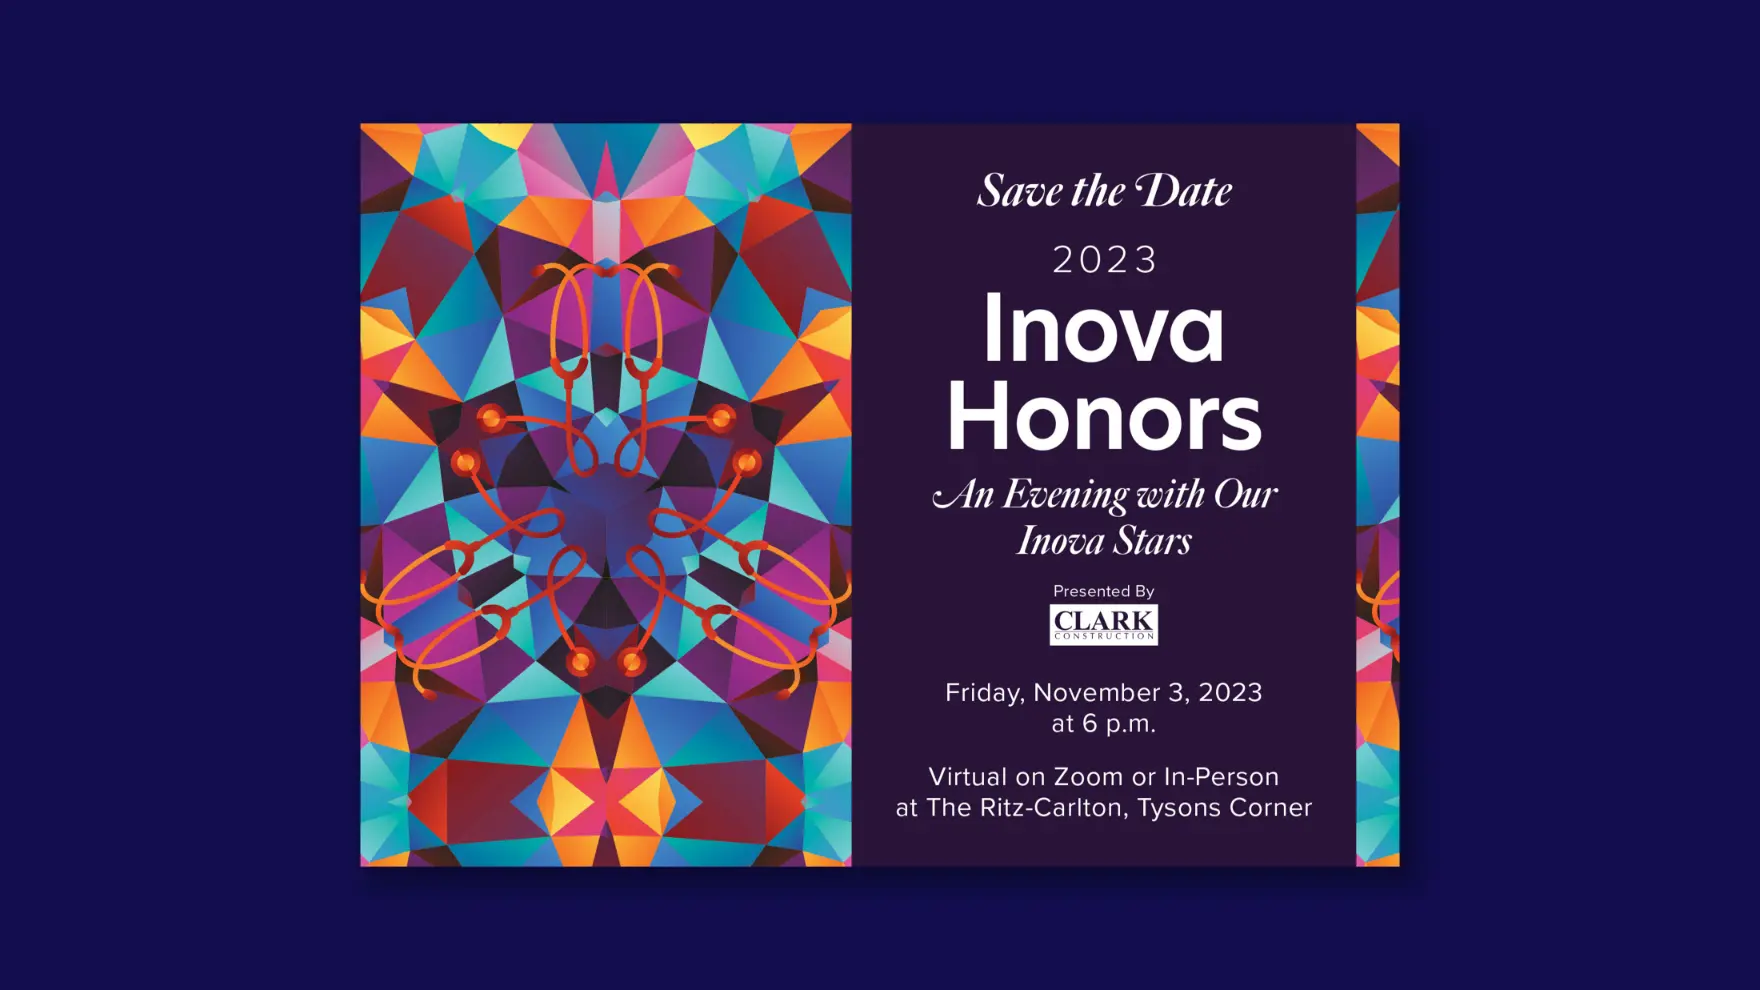 Save the Date for the Inova Honors Gala.